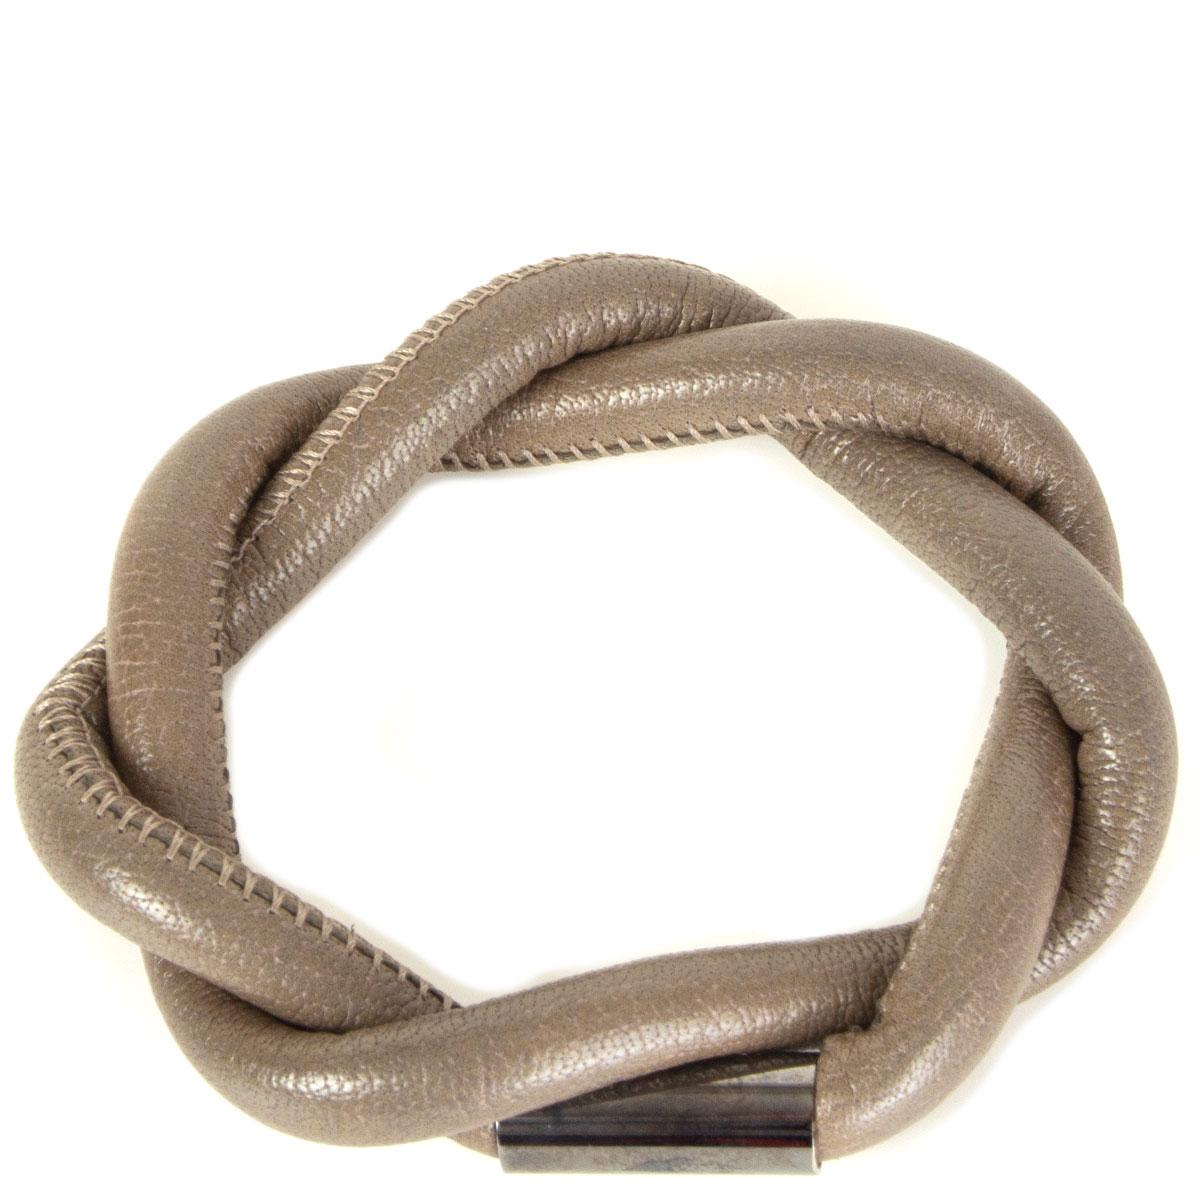 authentic Burberry braided taupe leather bracelet. Has been worn and is in excellent condition.

Circumference18.5cm (7.2in)